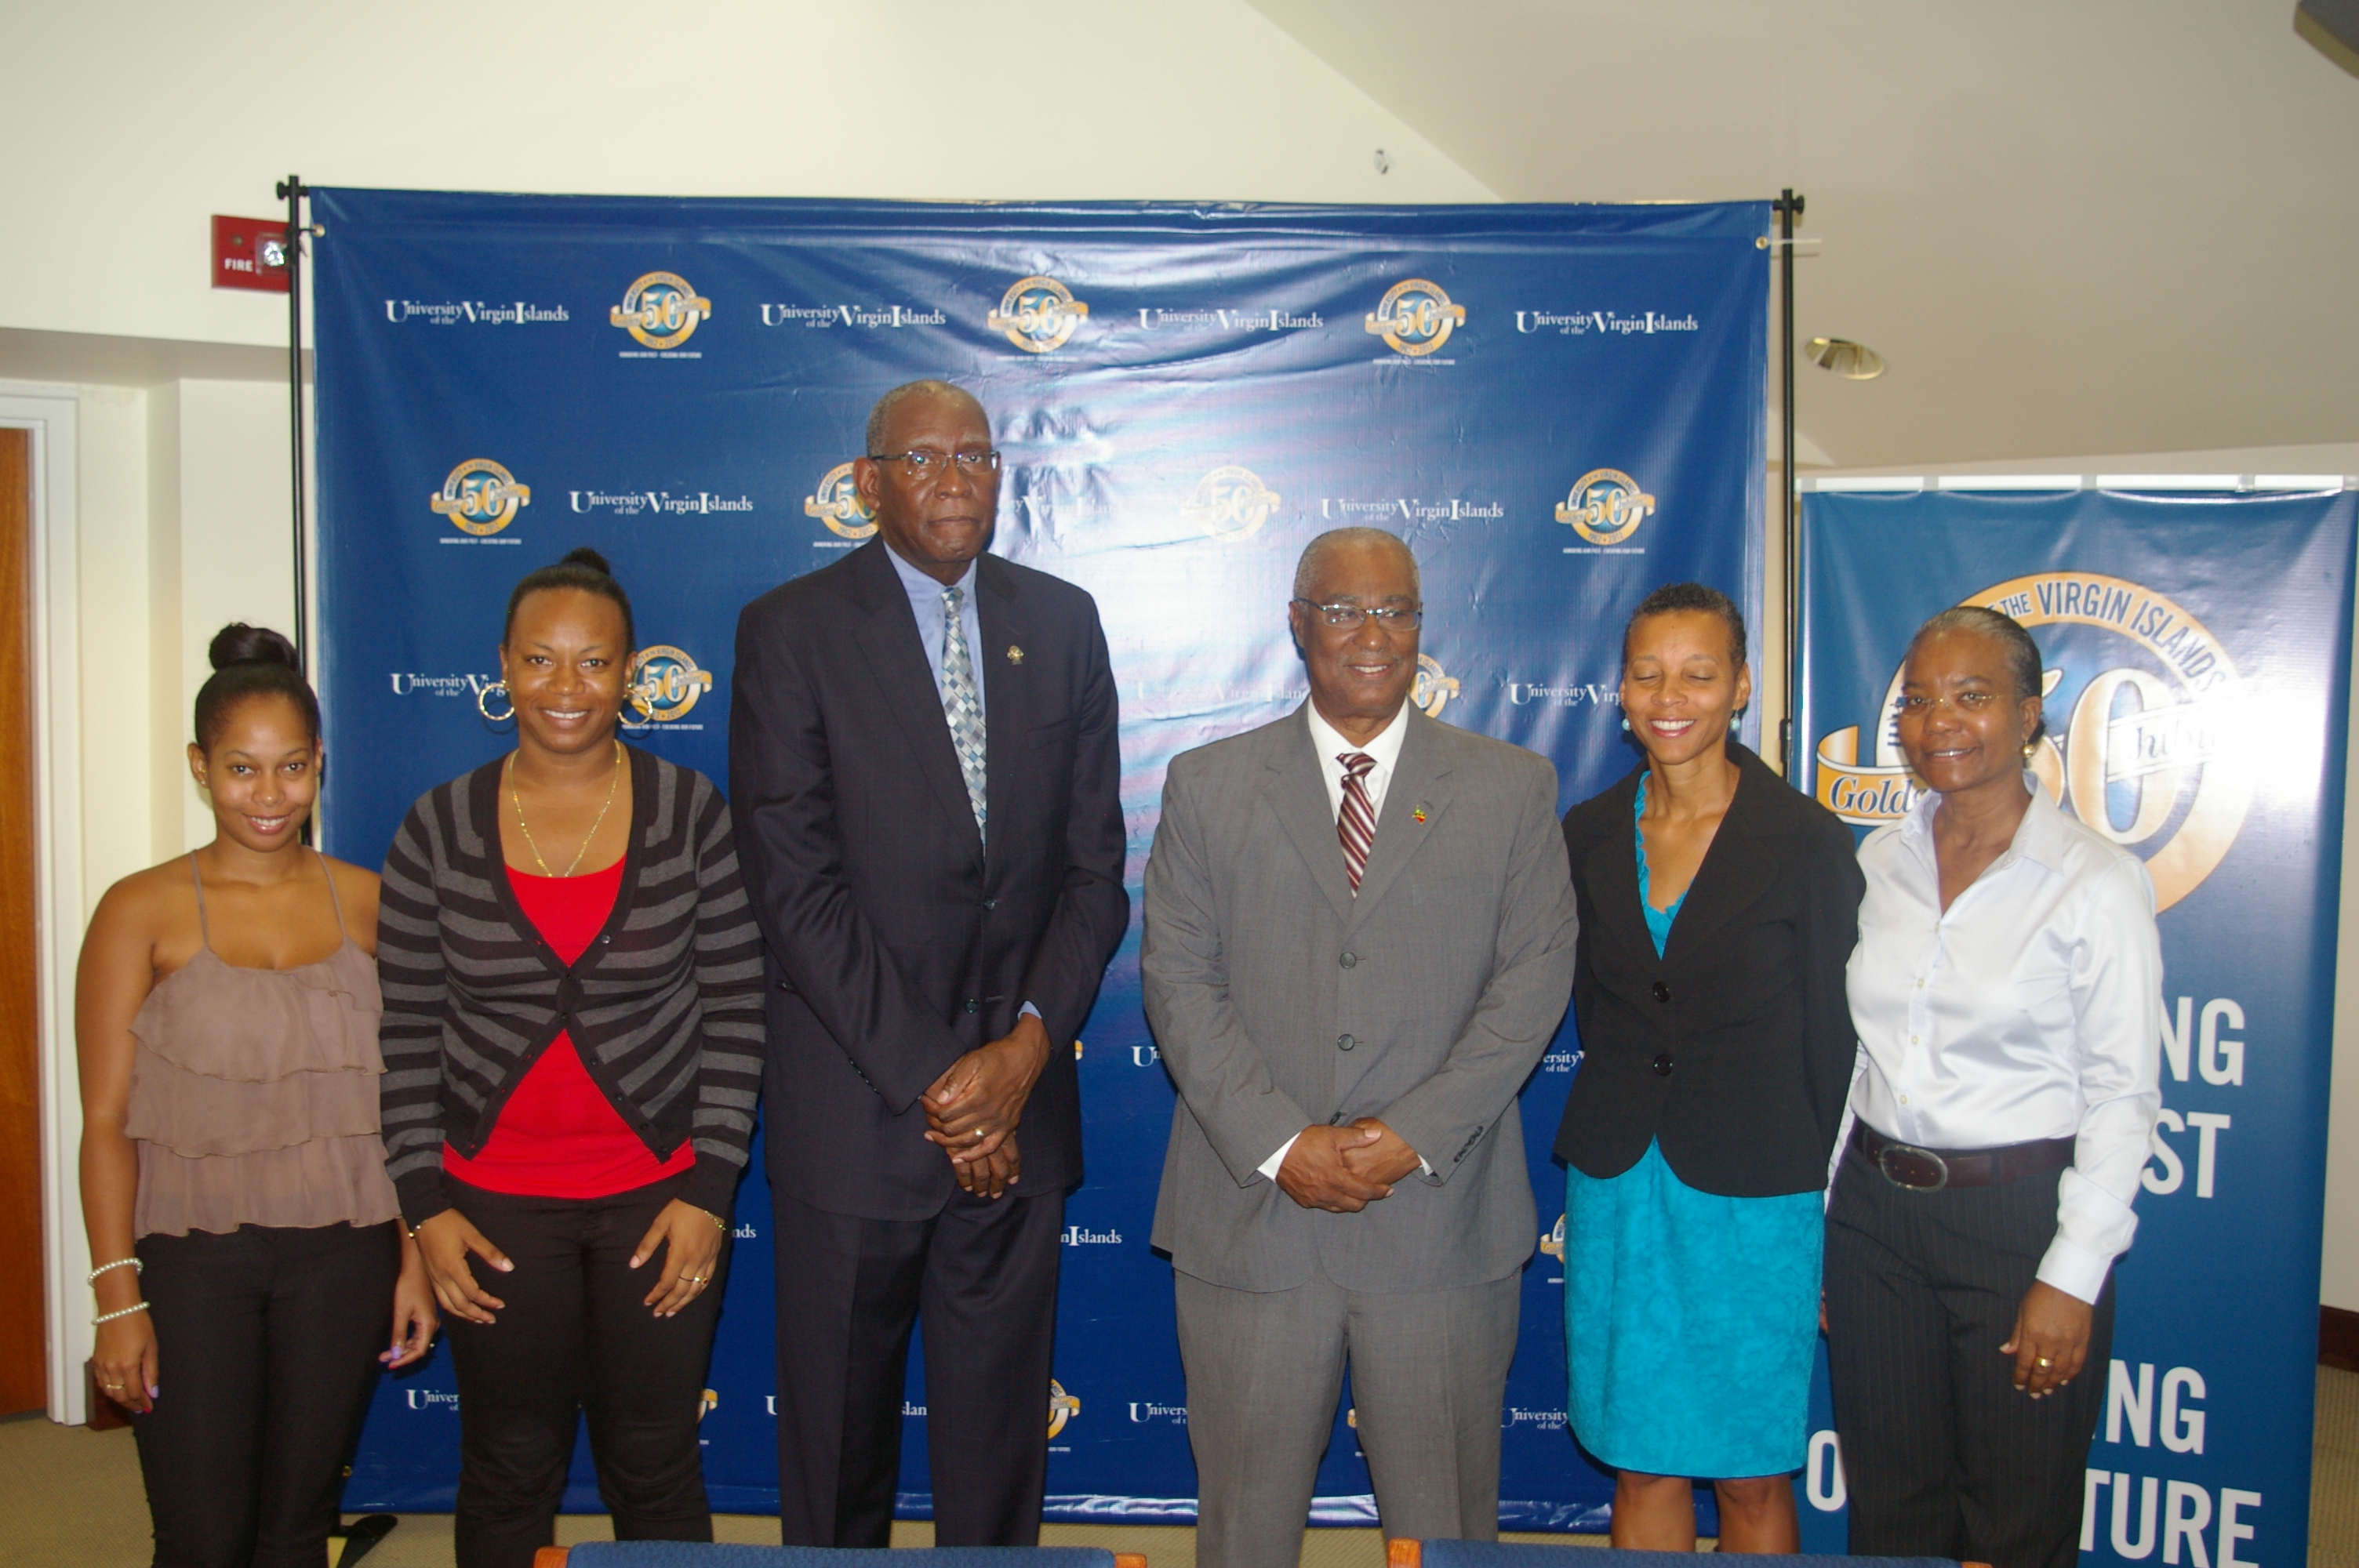 (L-R) UVI students-Ms.Abigail Parry and Ms Aujeunelle Brown, UVI President- Mr. David Hall, Premier of Nevis, Hon. Joseph Parry and UVI staff members.  